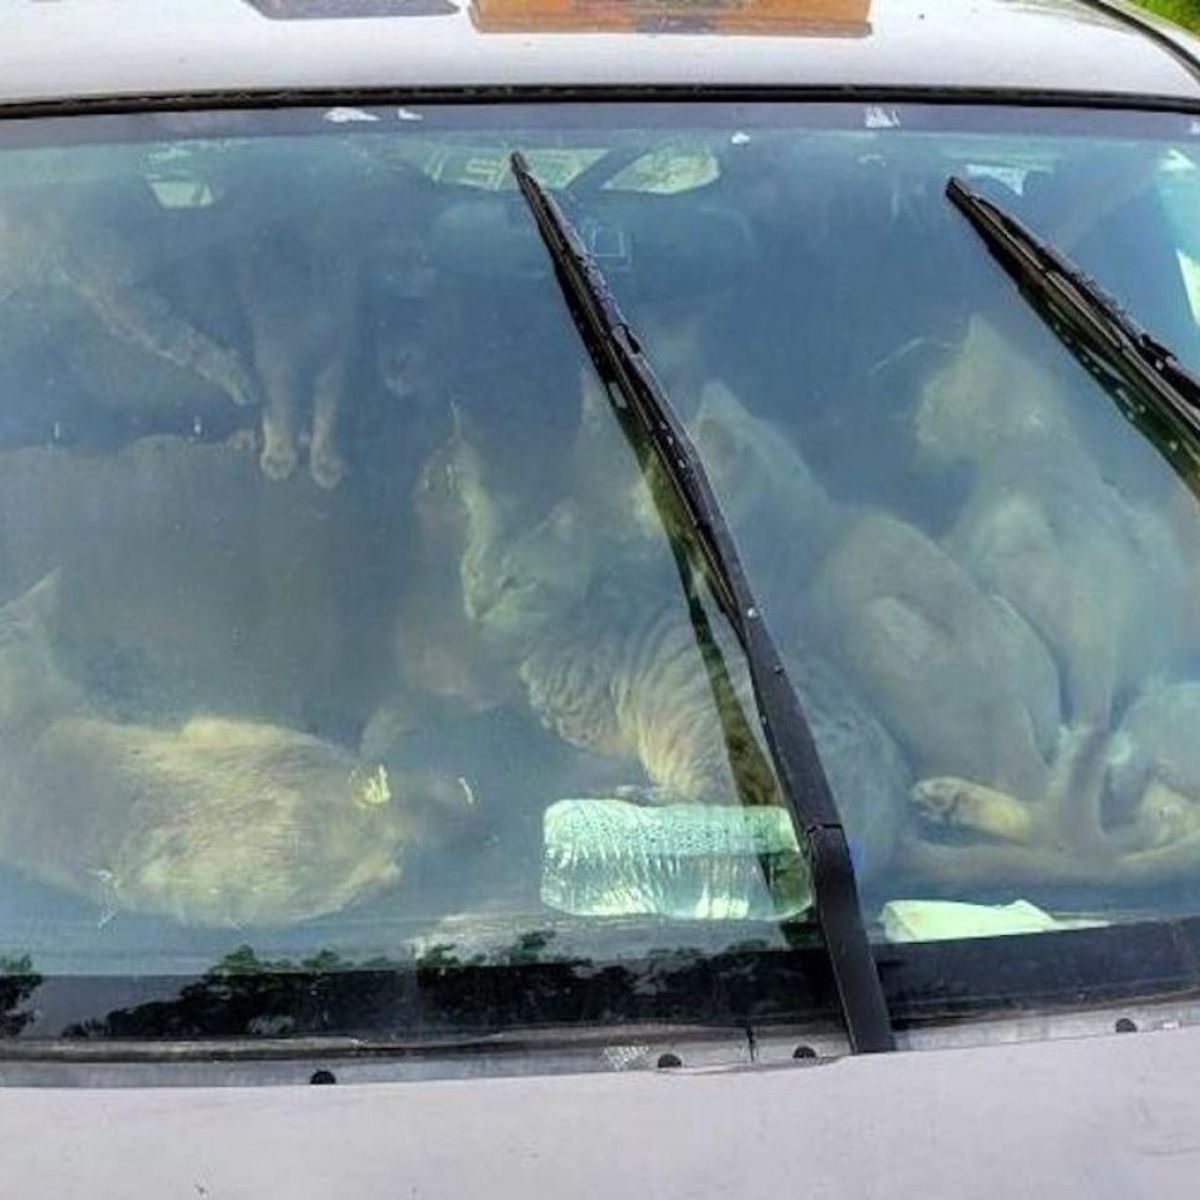 many cats in a car